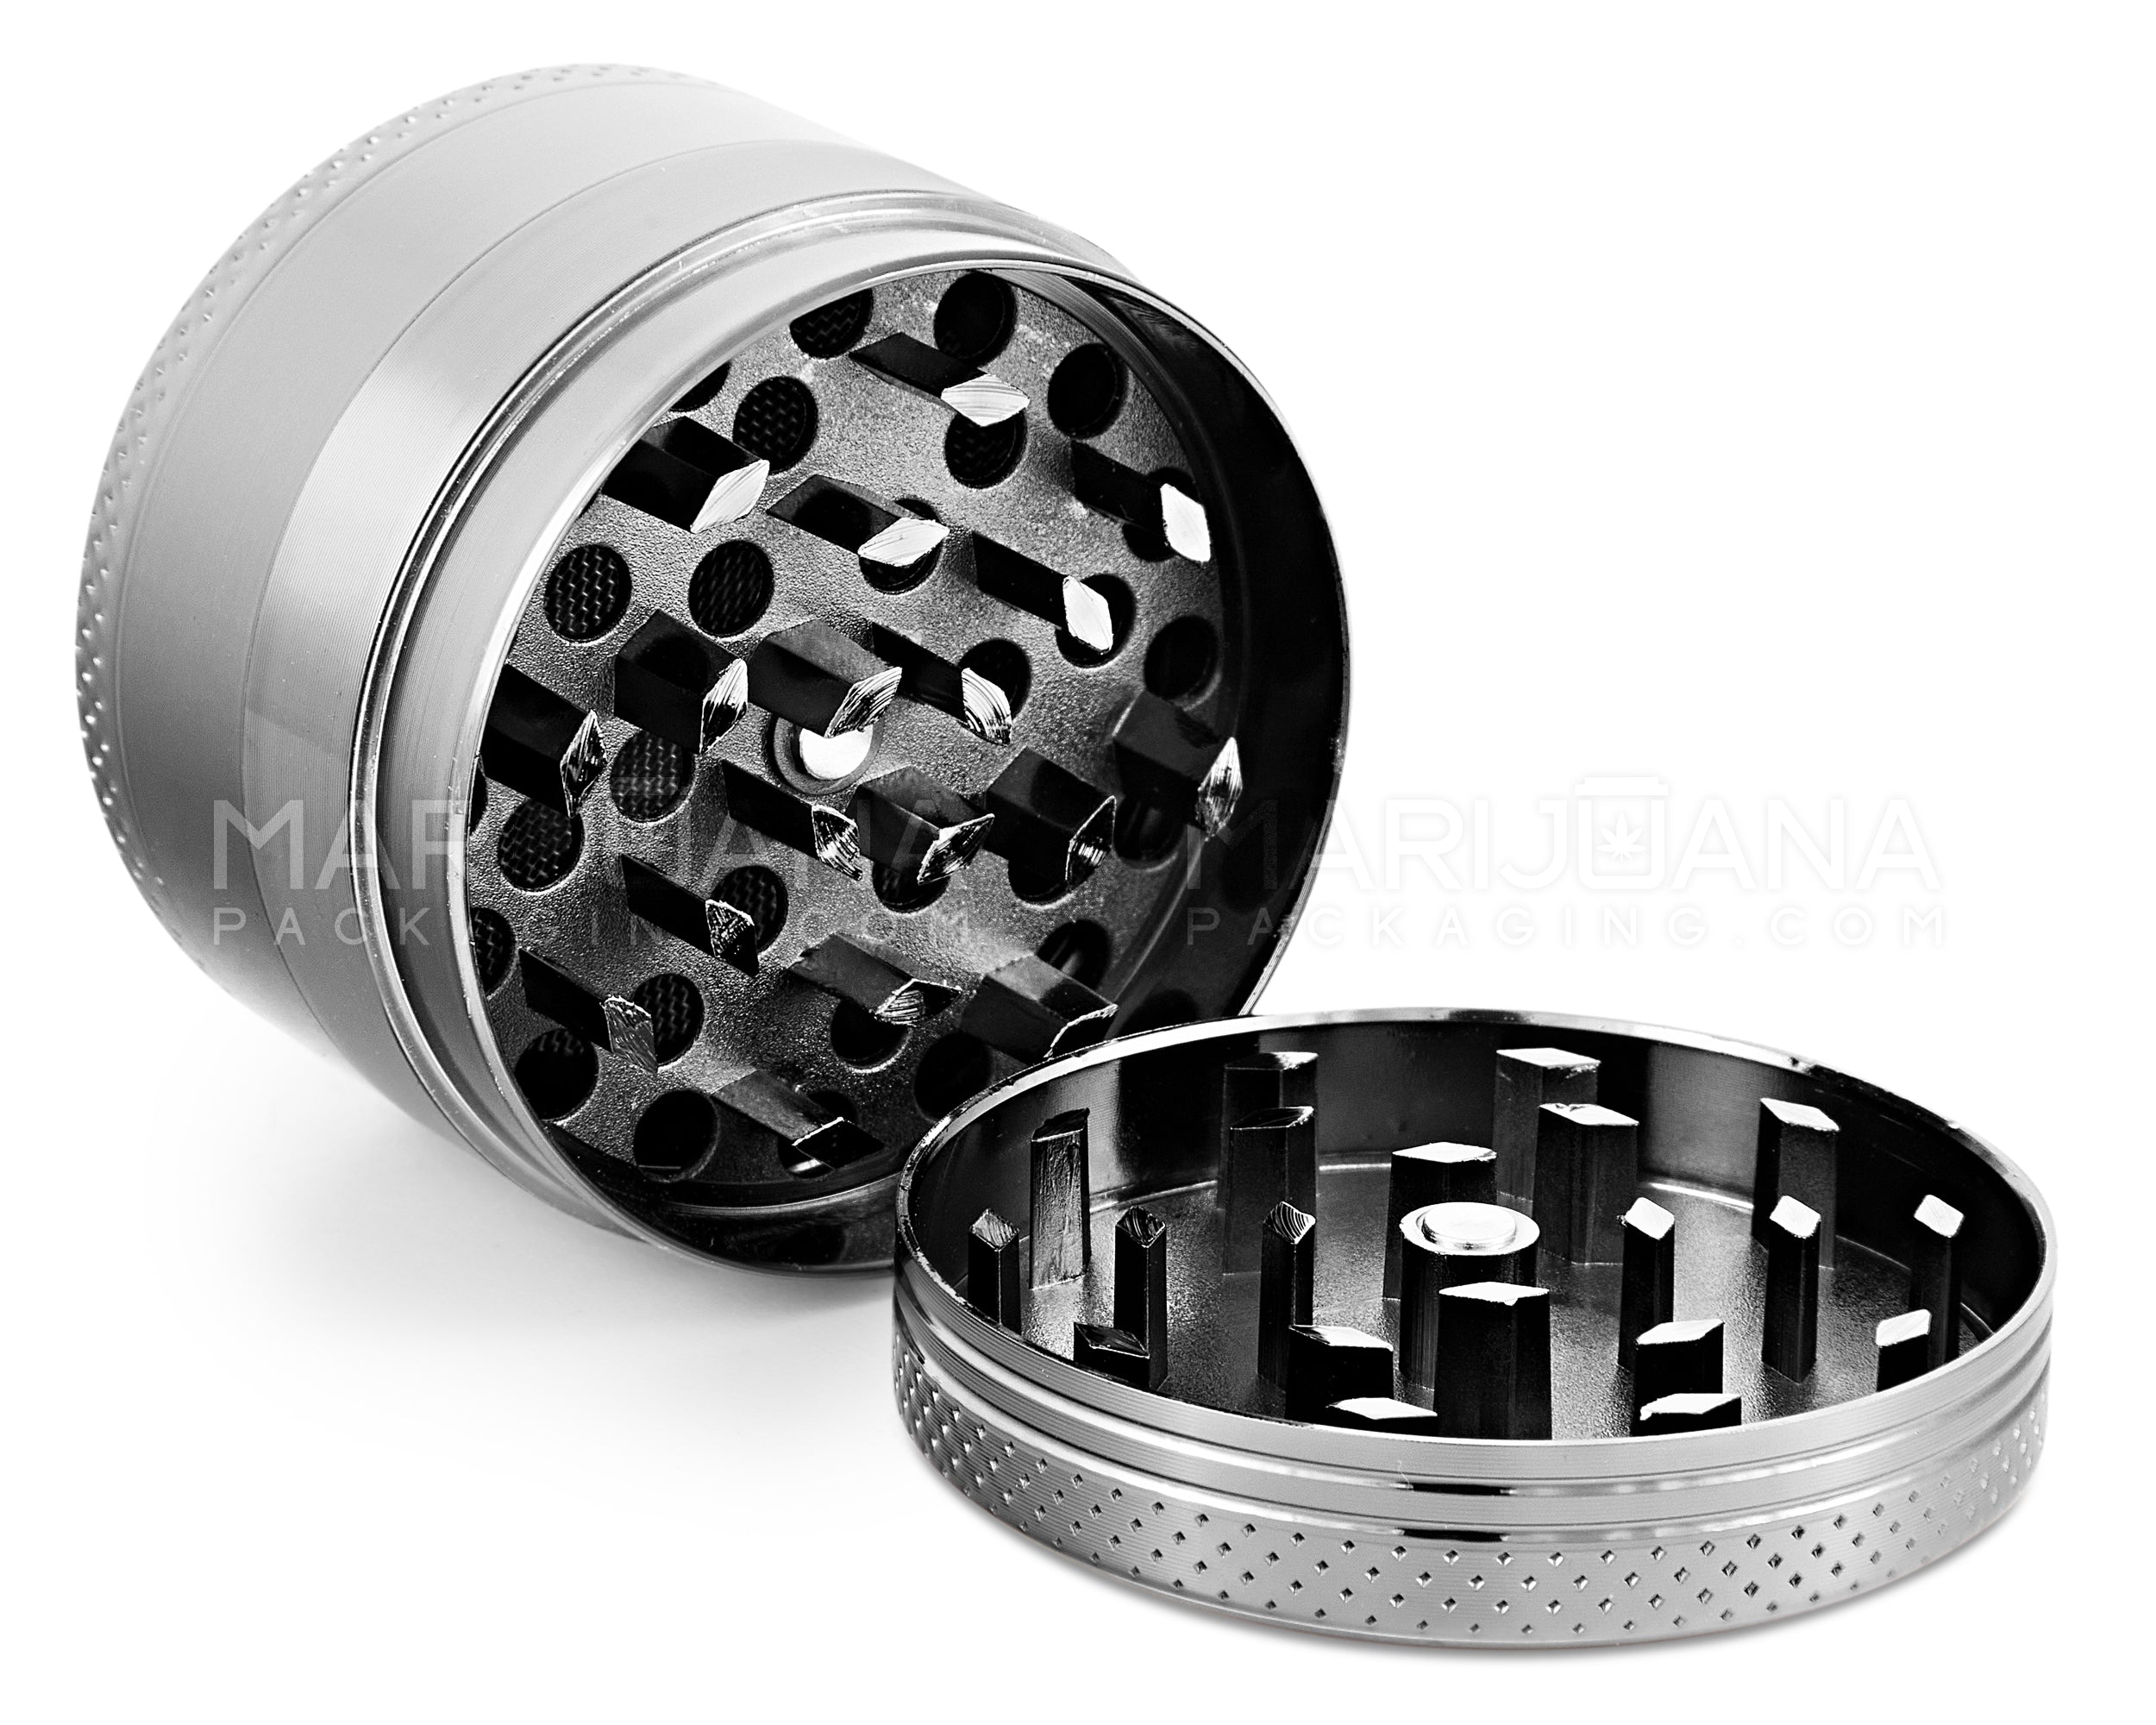 R&M Decal Magnetic Metal Grinder w/ Catcher | 4 Piece - 50mm - Assorted - 2